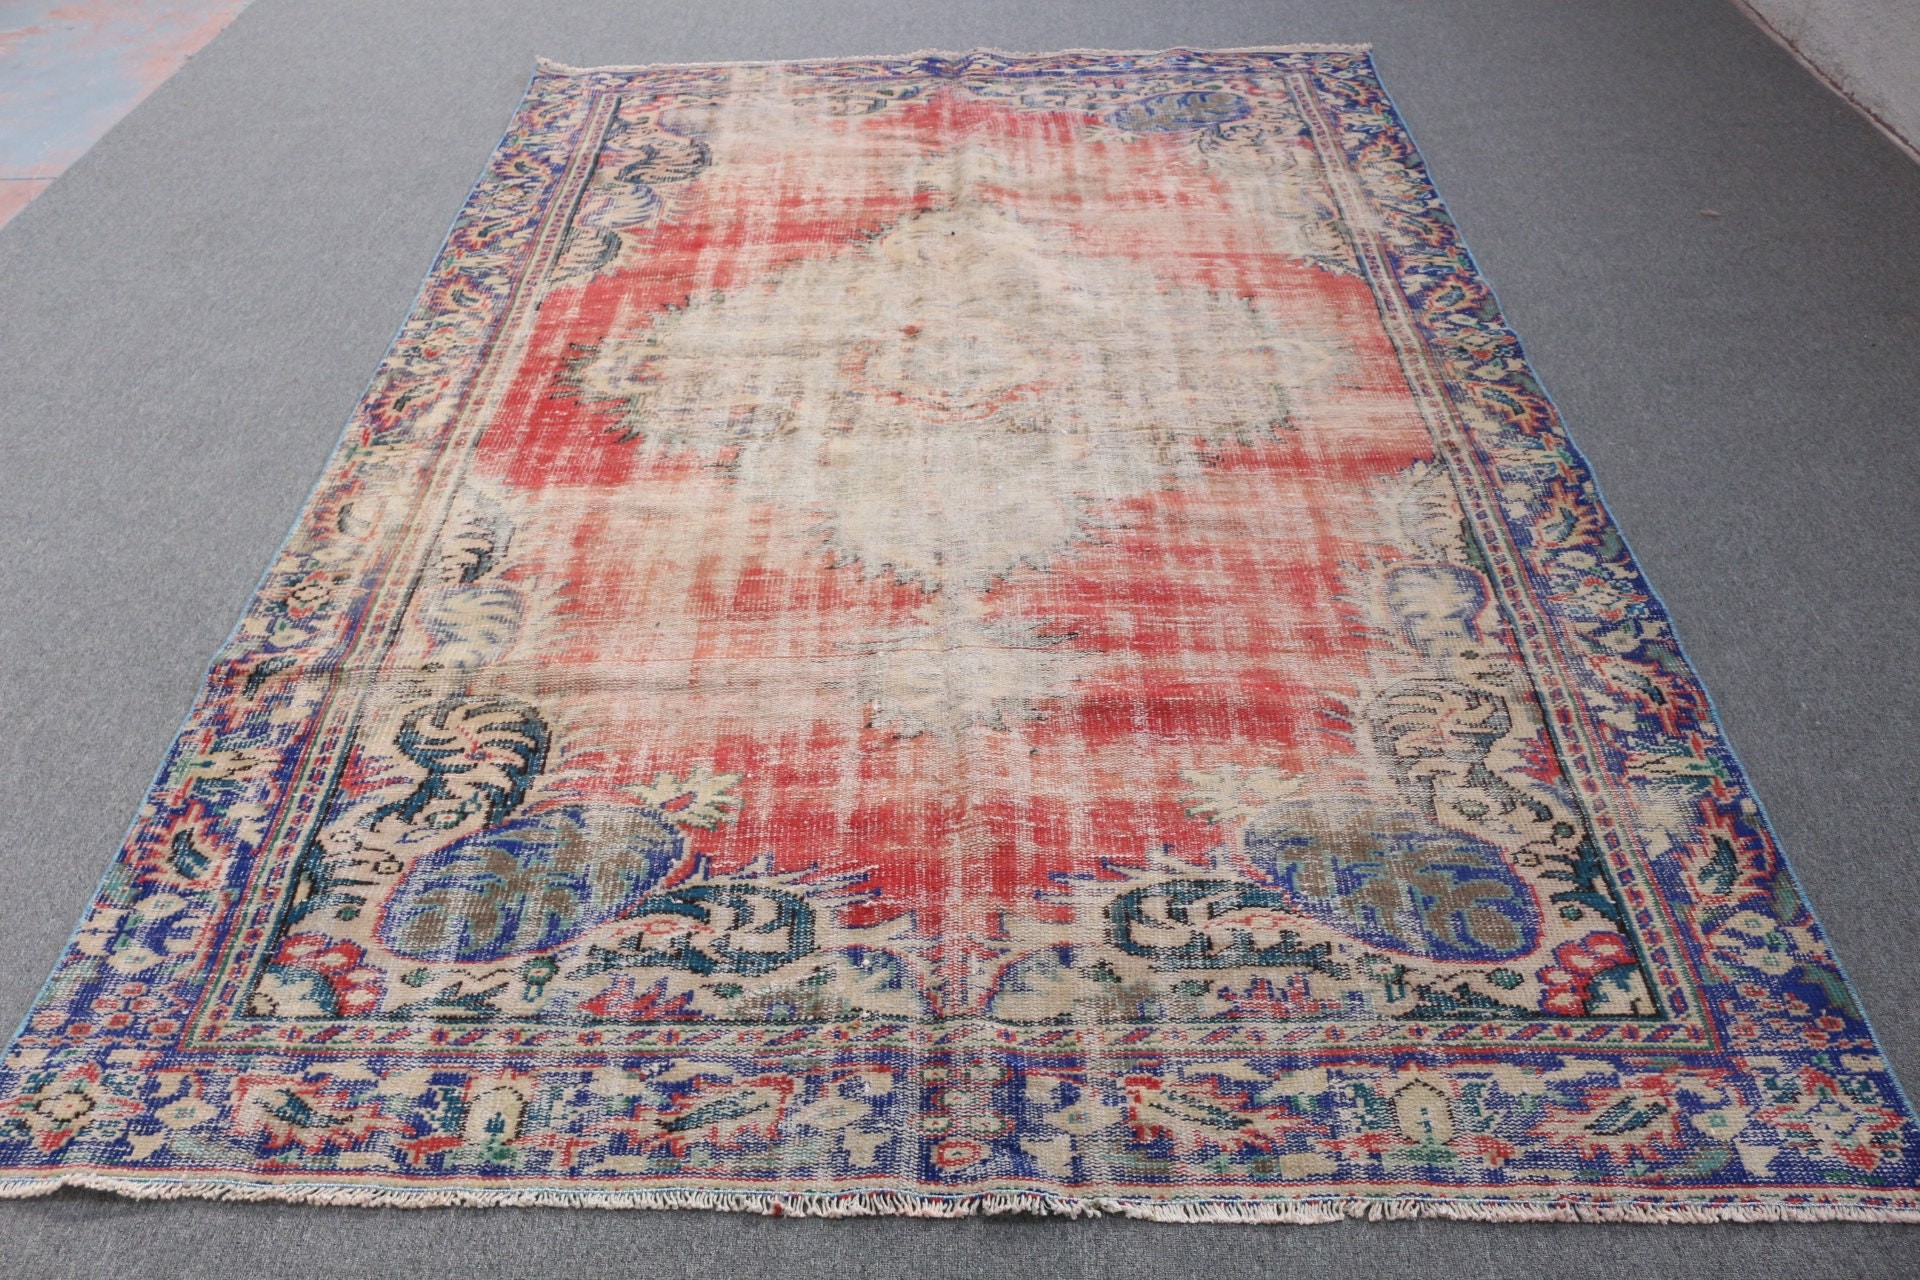 Cool Rug, Red Cool Rugs, Dining Room Rugs, Rugs for Salon, Bedroom Rugs, Vintage Rug, 6.3x9.9 ft Large Rug, Turkish Rugs, Anatolian Rug